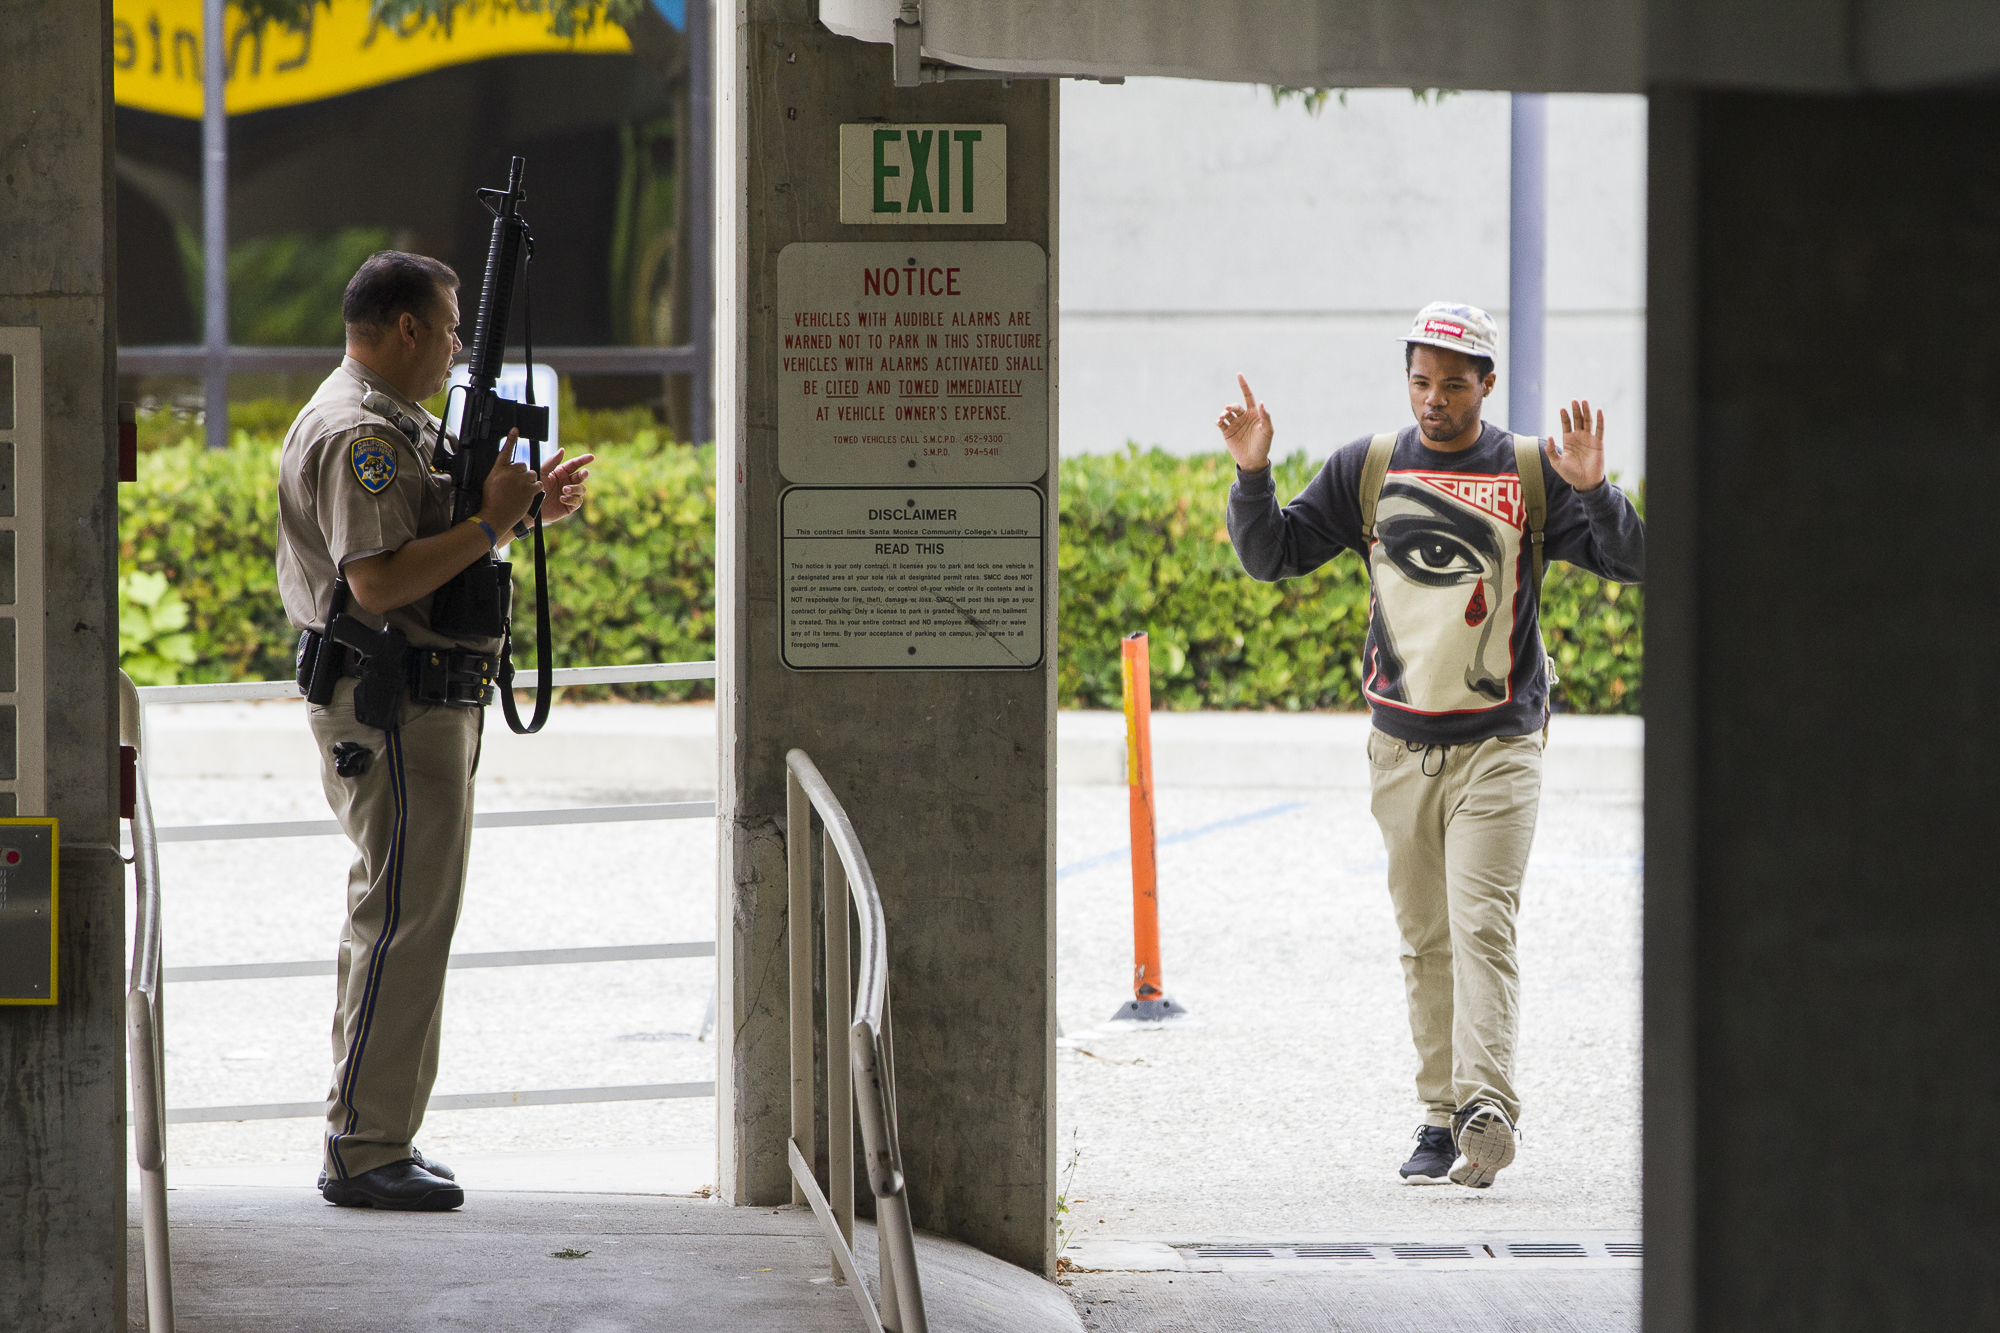  A student is evacuated from the business building on the campus of Santa Monica College by an armed California Highway Patrol officer (CHP) and then searched on June 13, 2013 in Santa Monica, California. (Jose Lopez/Corsair Contributor) 